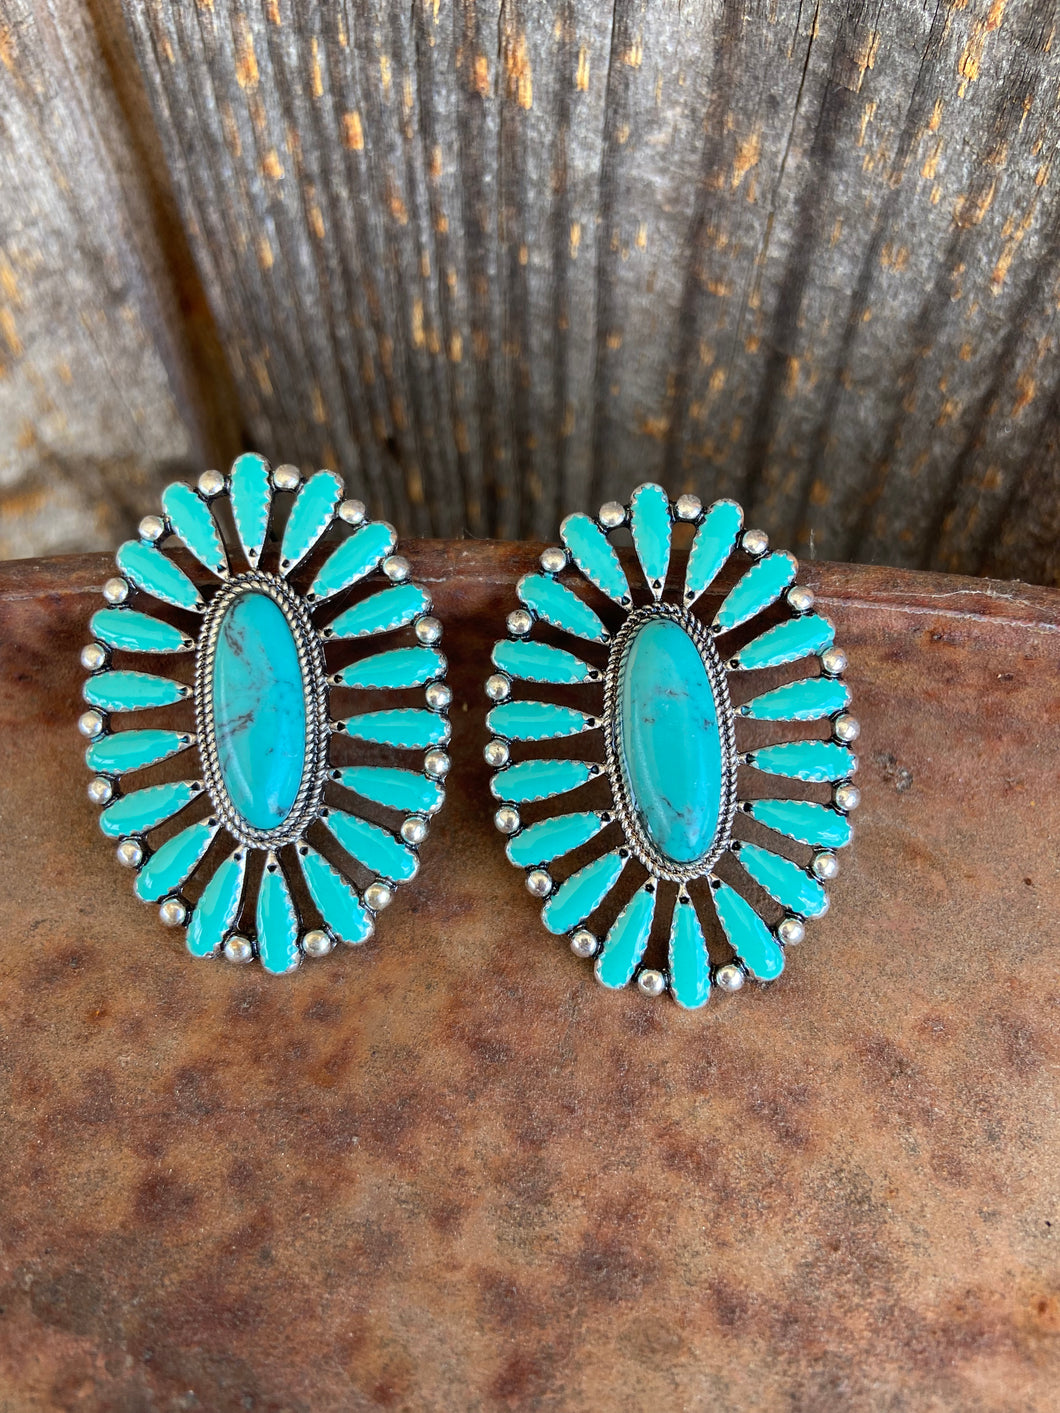 THE TURQUOISE CONCHO FLOWER STUD EARRINGS